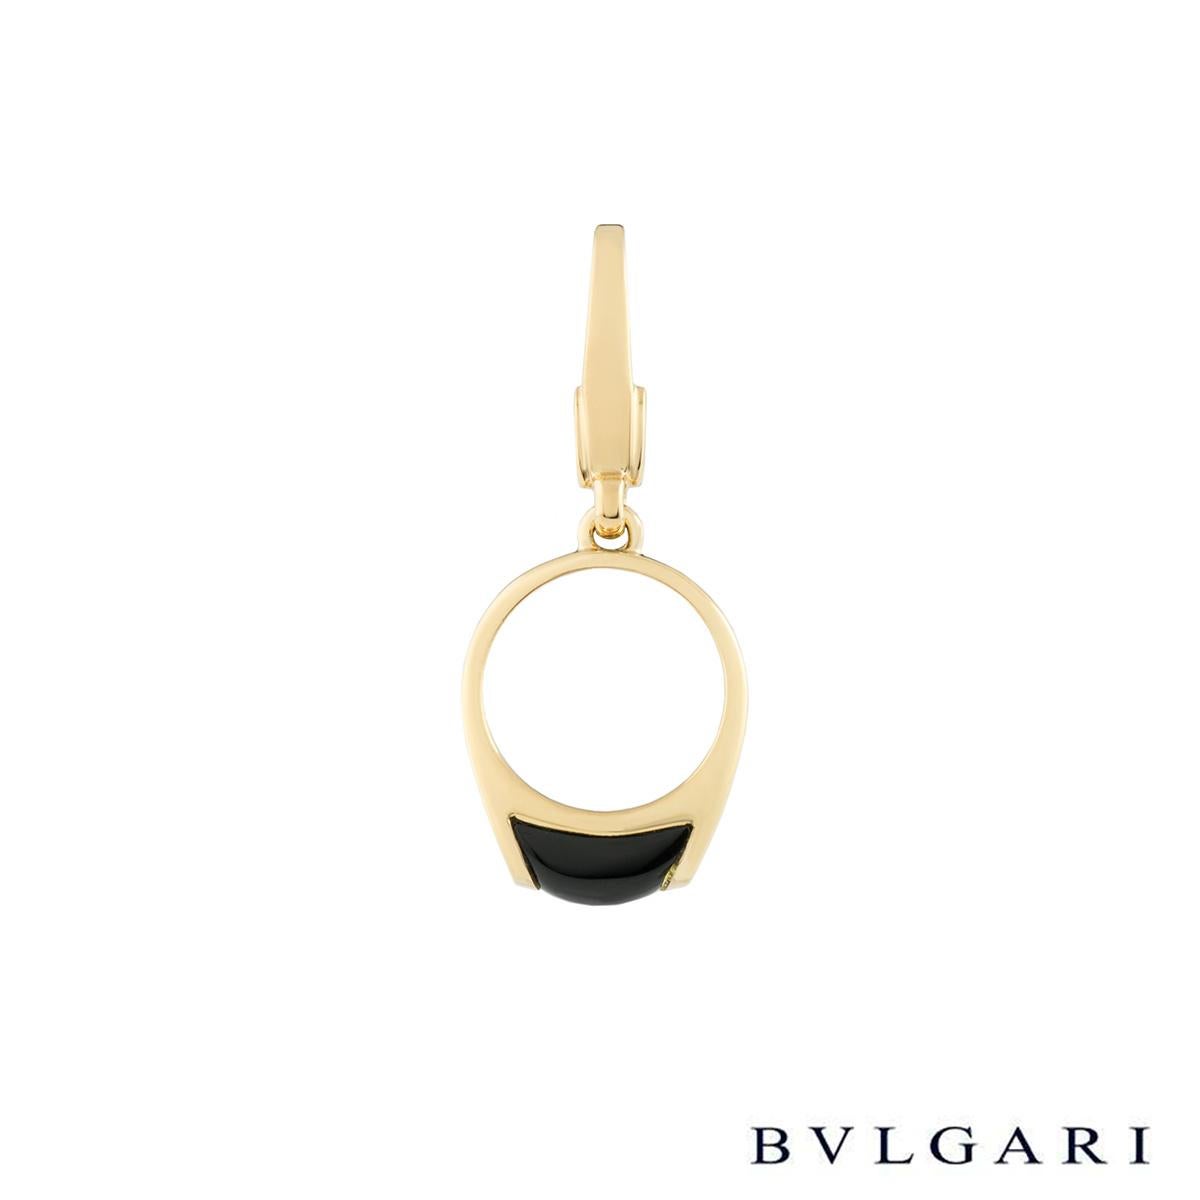 An elegant 18k white gold Bvlgari charm pendant. The pendant comprises of a ring motif with a onyx inlay in a tension setting. The pendant measures 3cm in length (including the bale) and 1.2cm in width. The charm has a gross weight of 2.90